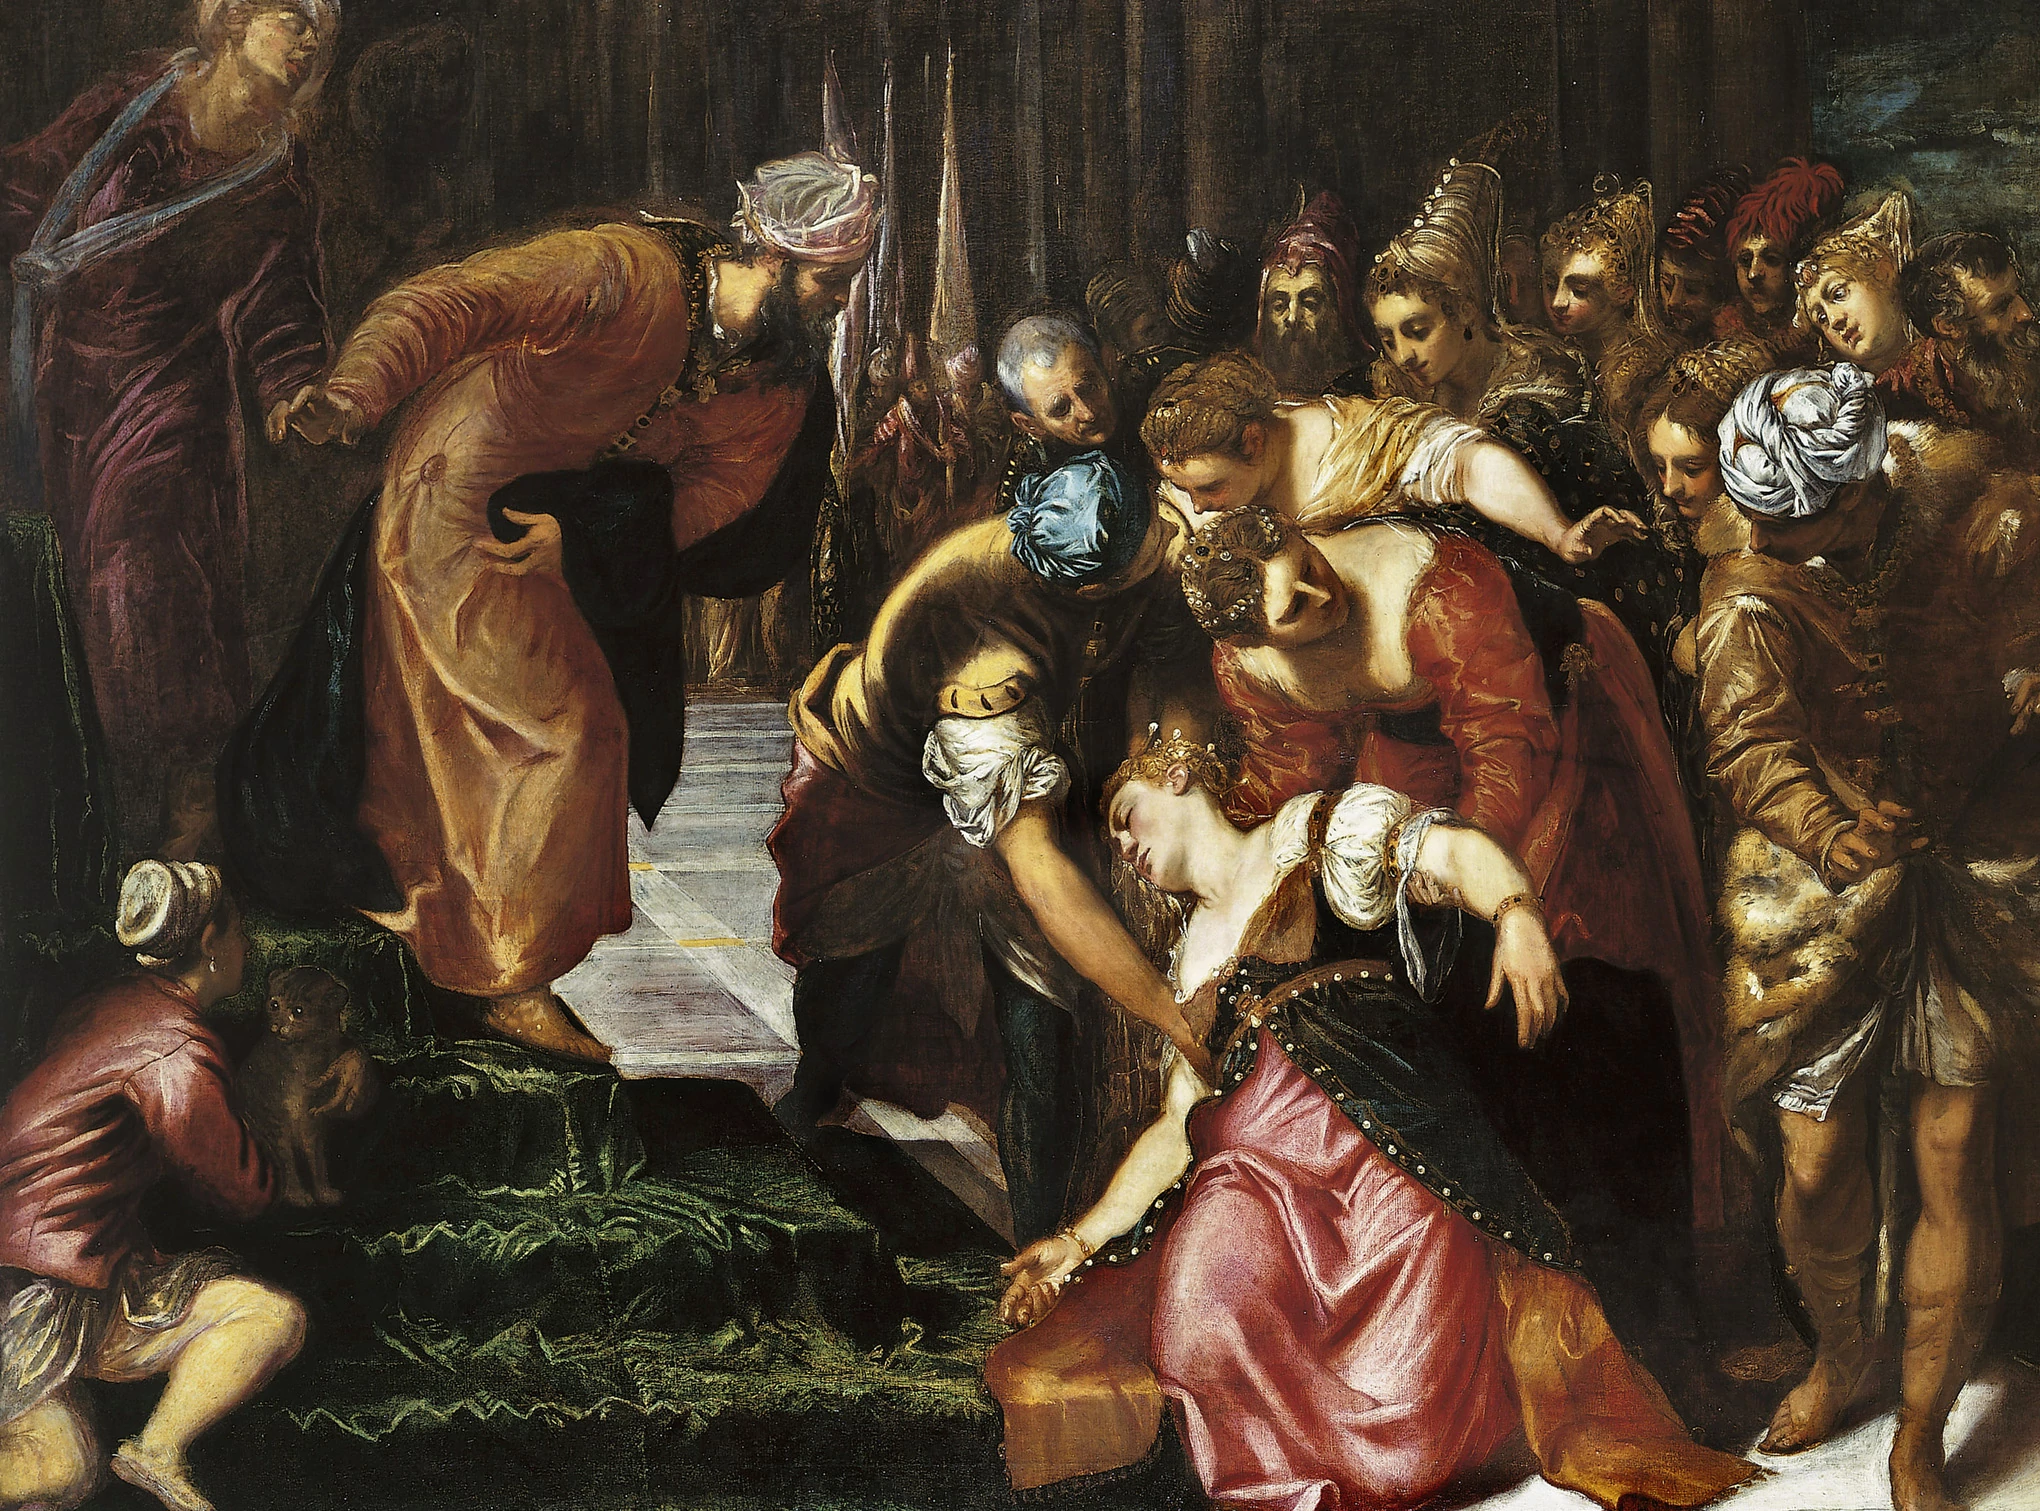 Tintoretto, The Artists